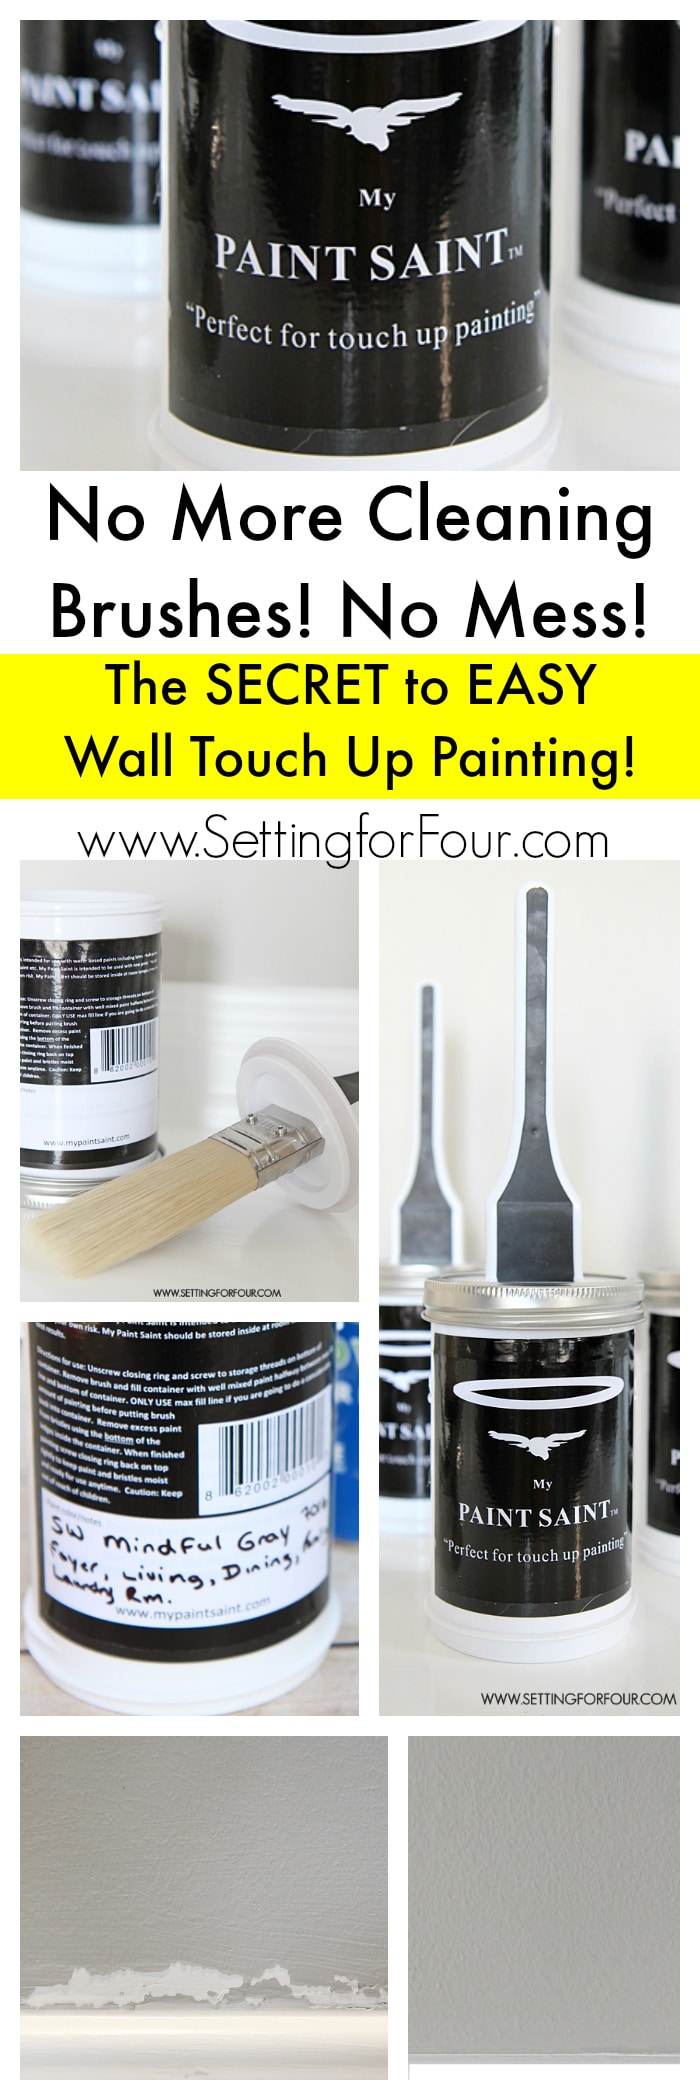 I tried this and am AMAZED! See the SECRET to easy, mess free wall touch up painting! No more cleaning brushes or dealing with old rusted cans of paint- hurray! www.settingforfour.com